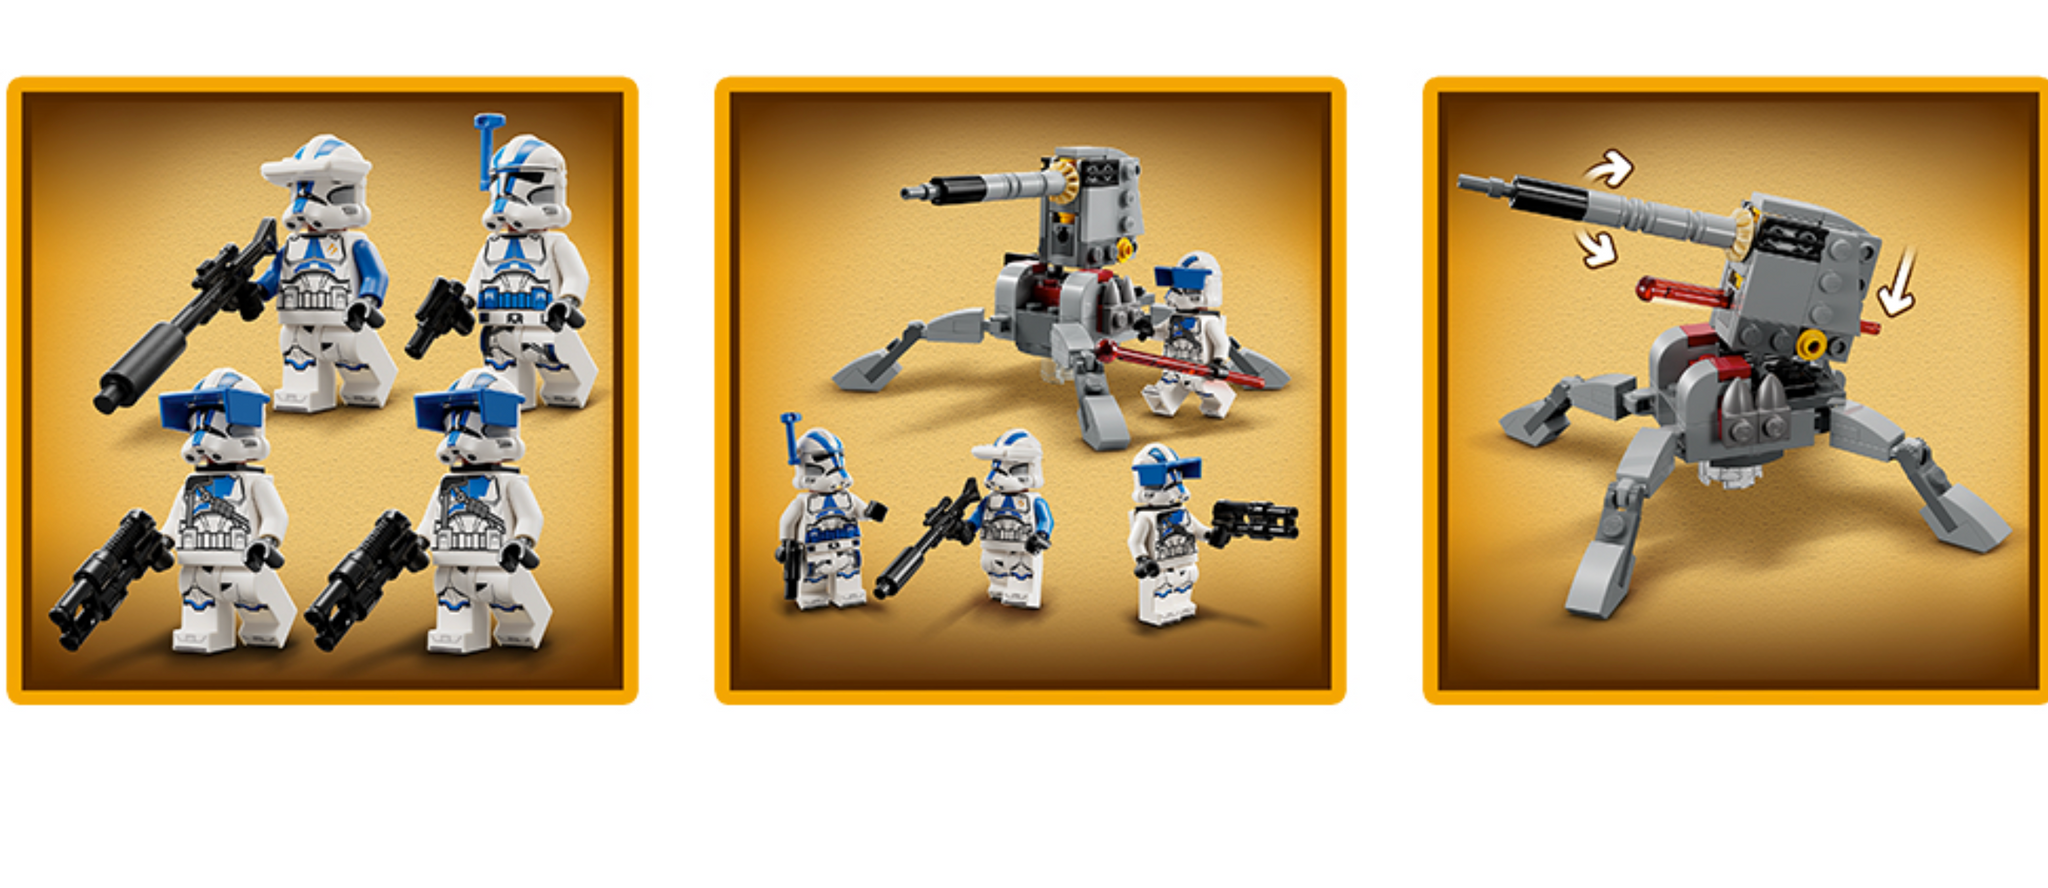 3 pack) LEGO Star Wars 501st Clone Troopers Battle Pack Set 75345 